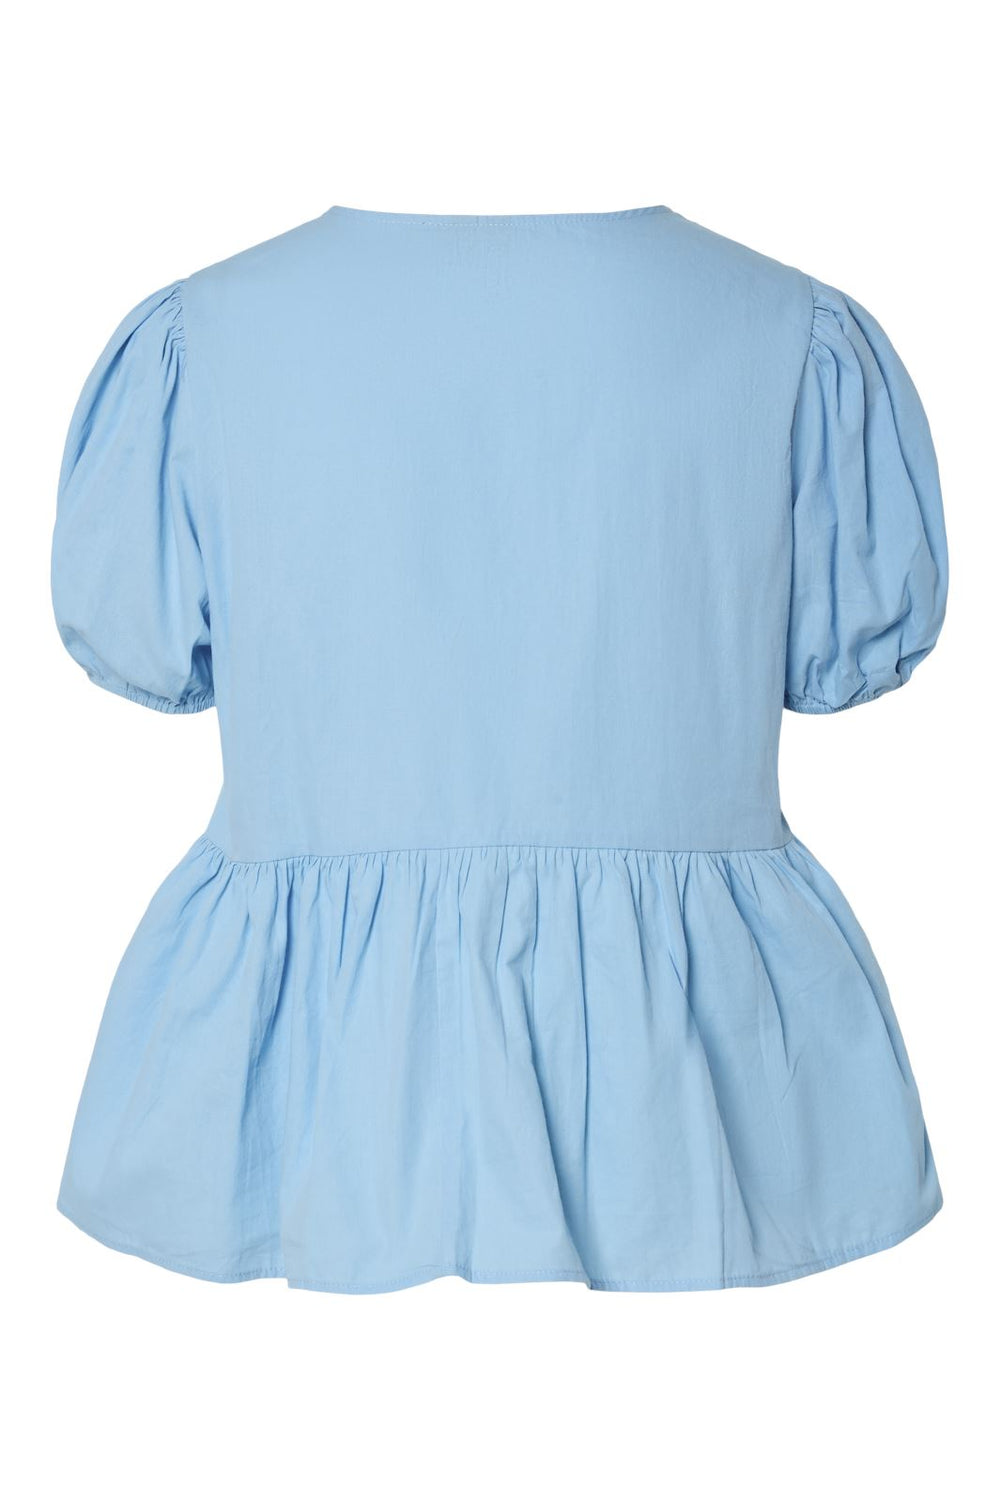 Pieces - Pcgolly Ss Bow Top - 4688606 Airy Blue Cloud Dancer Bow